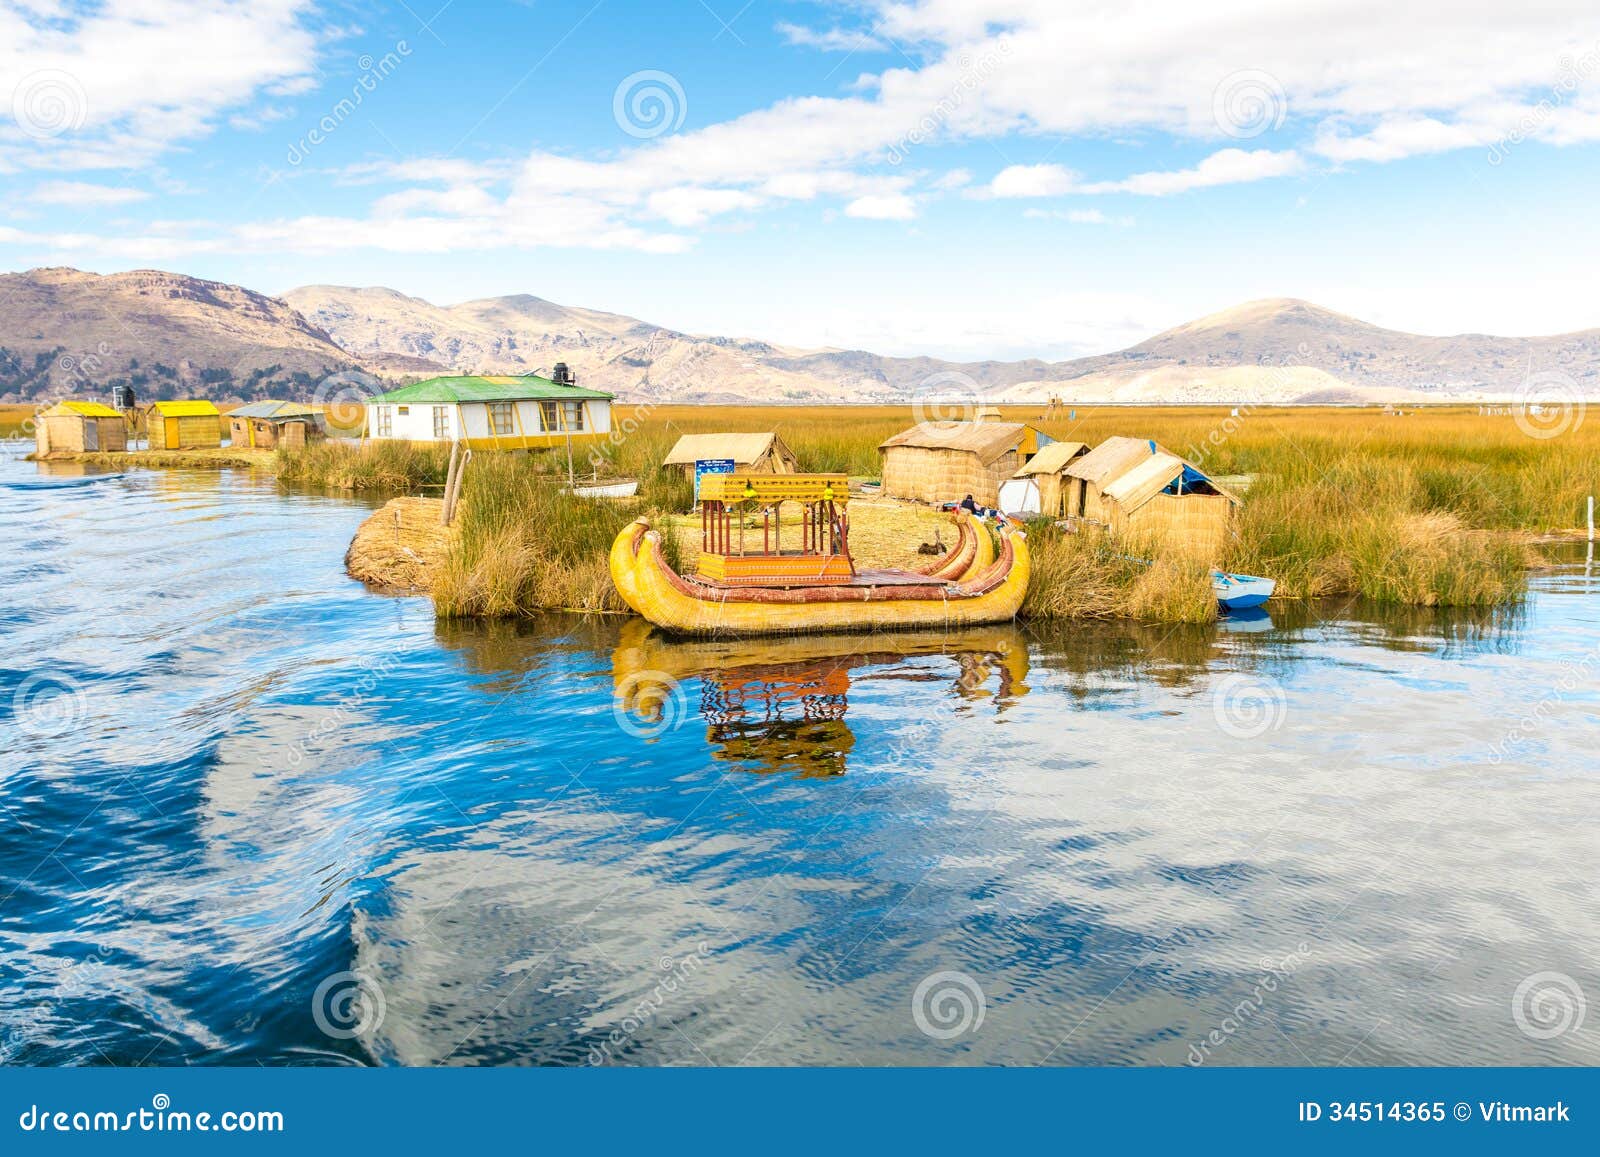 traditional reed boat lake titicaca,peru,puno,uros,south america,floating islands,natural layer